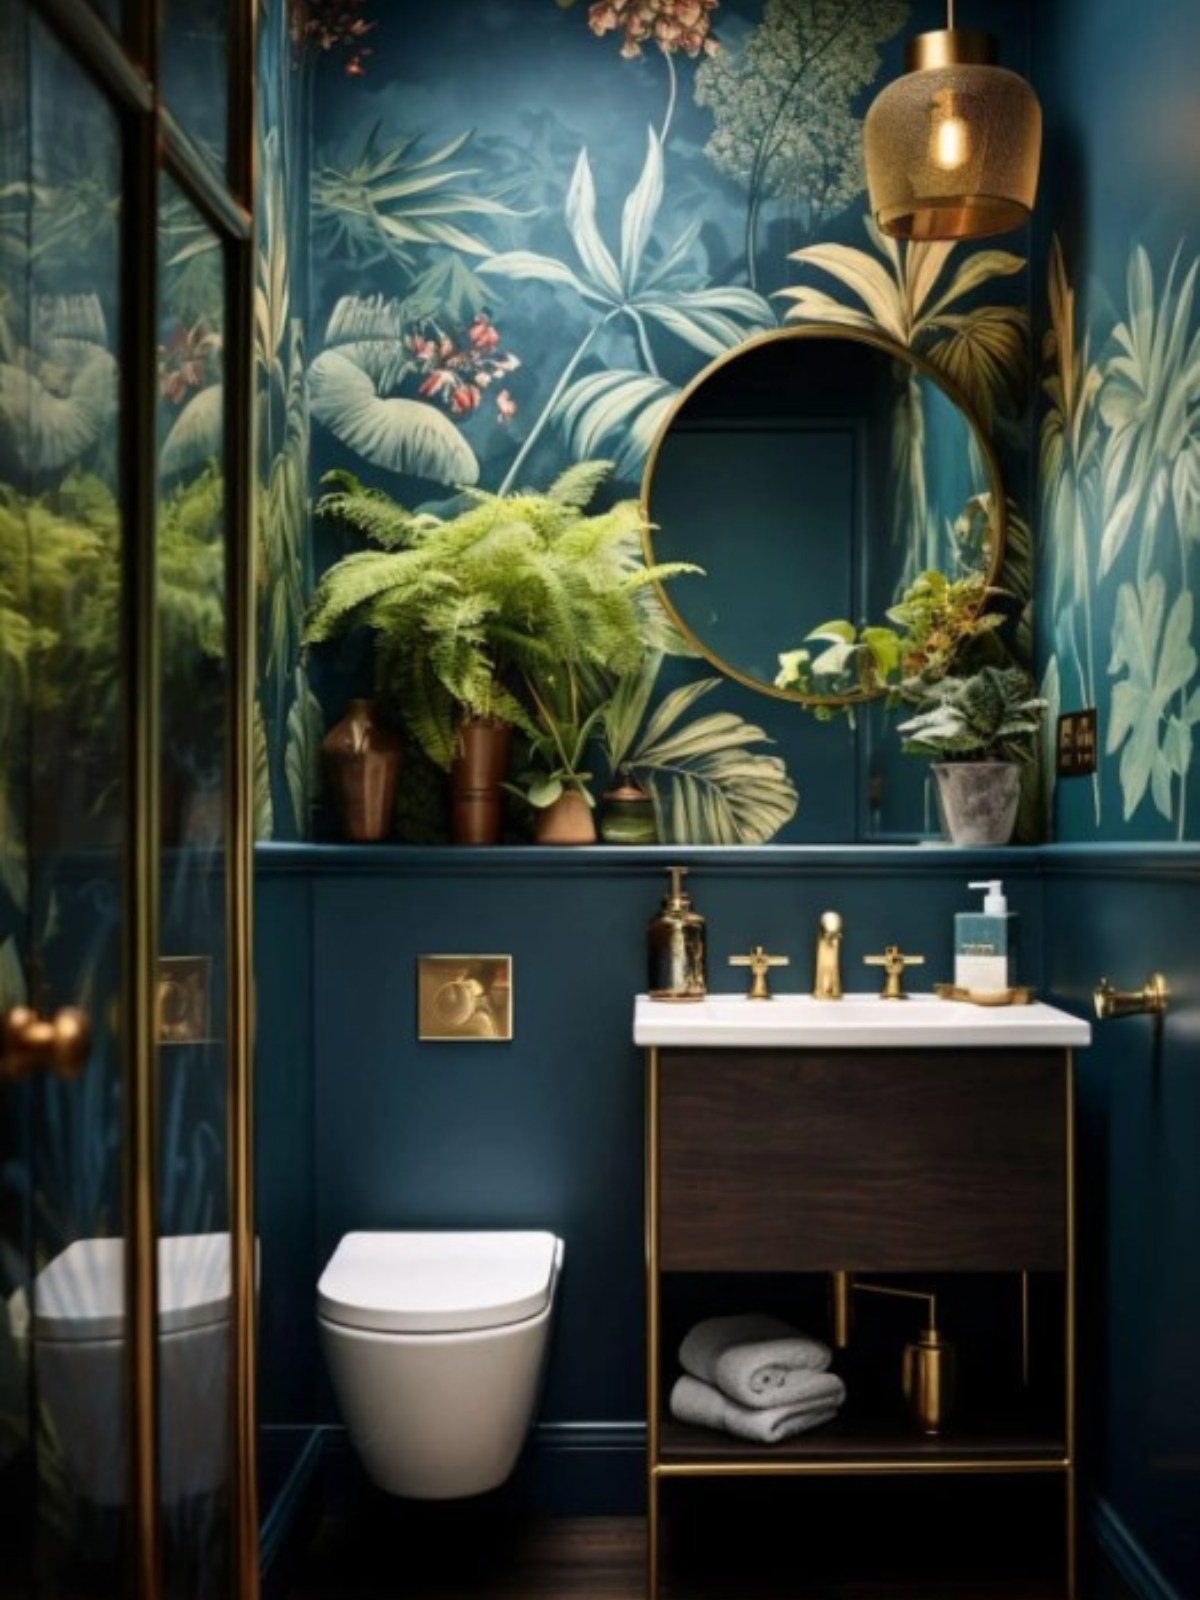 powder room with bold tropical inspired wallcovering, toilet, vanity, round mirror and pendant light